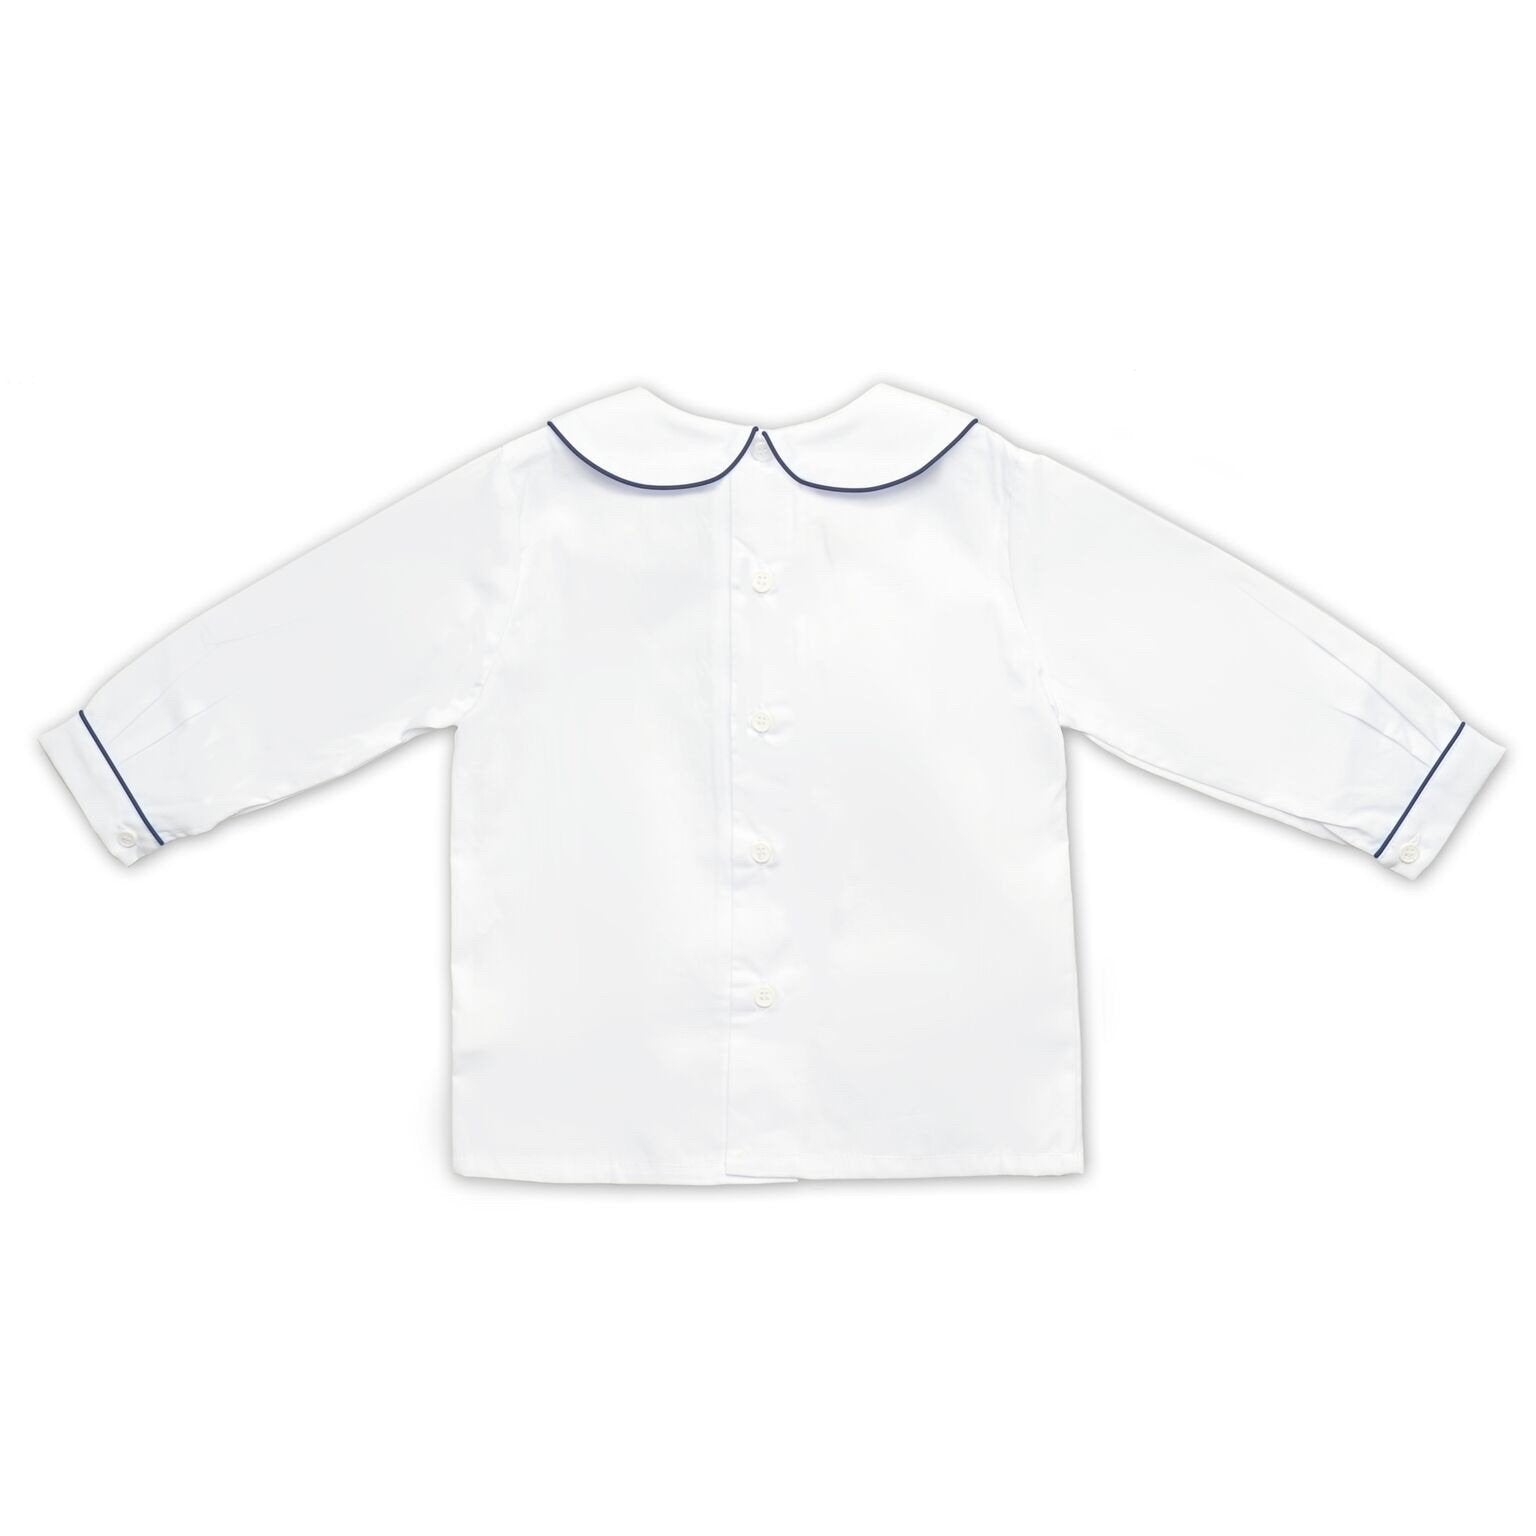 Boys White Collared Long Sleeve Shirt With Navy Trim - Cou Cou Baby